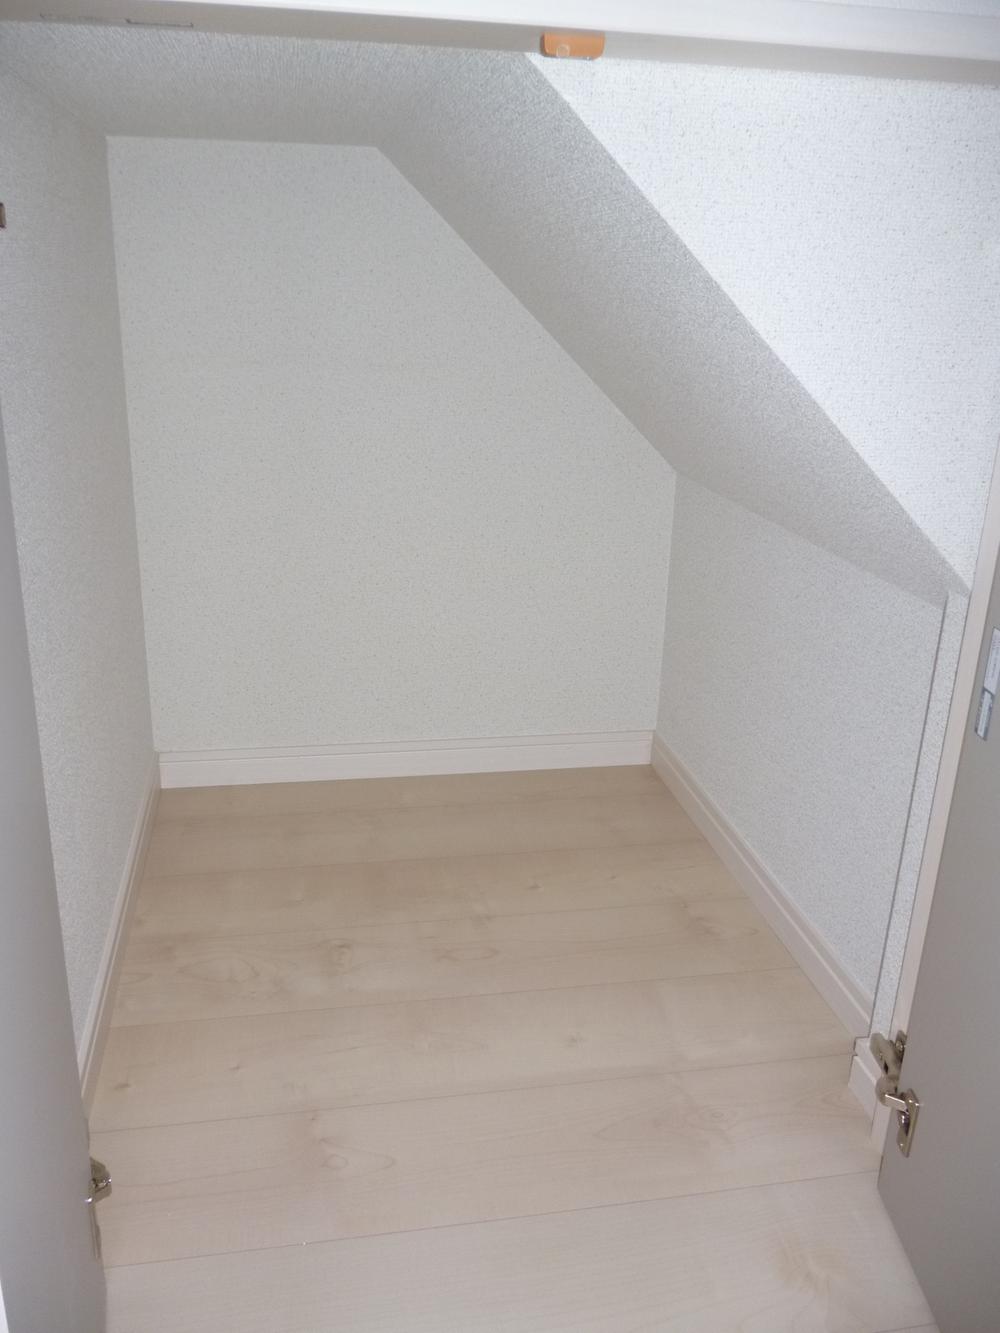 Other. Storage space under the stairs